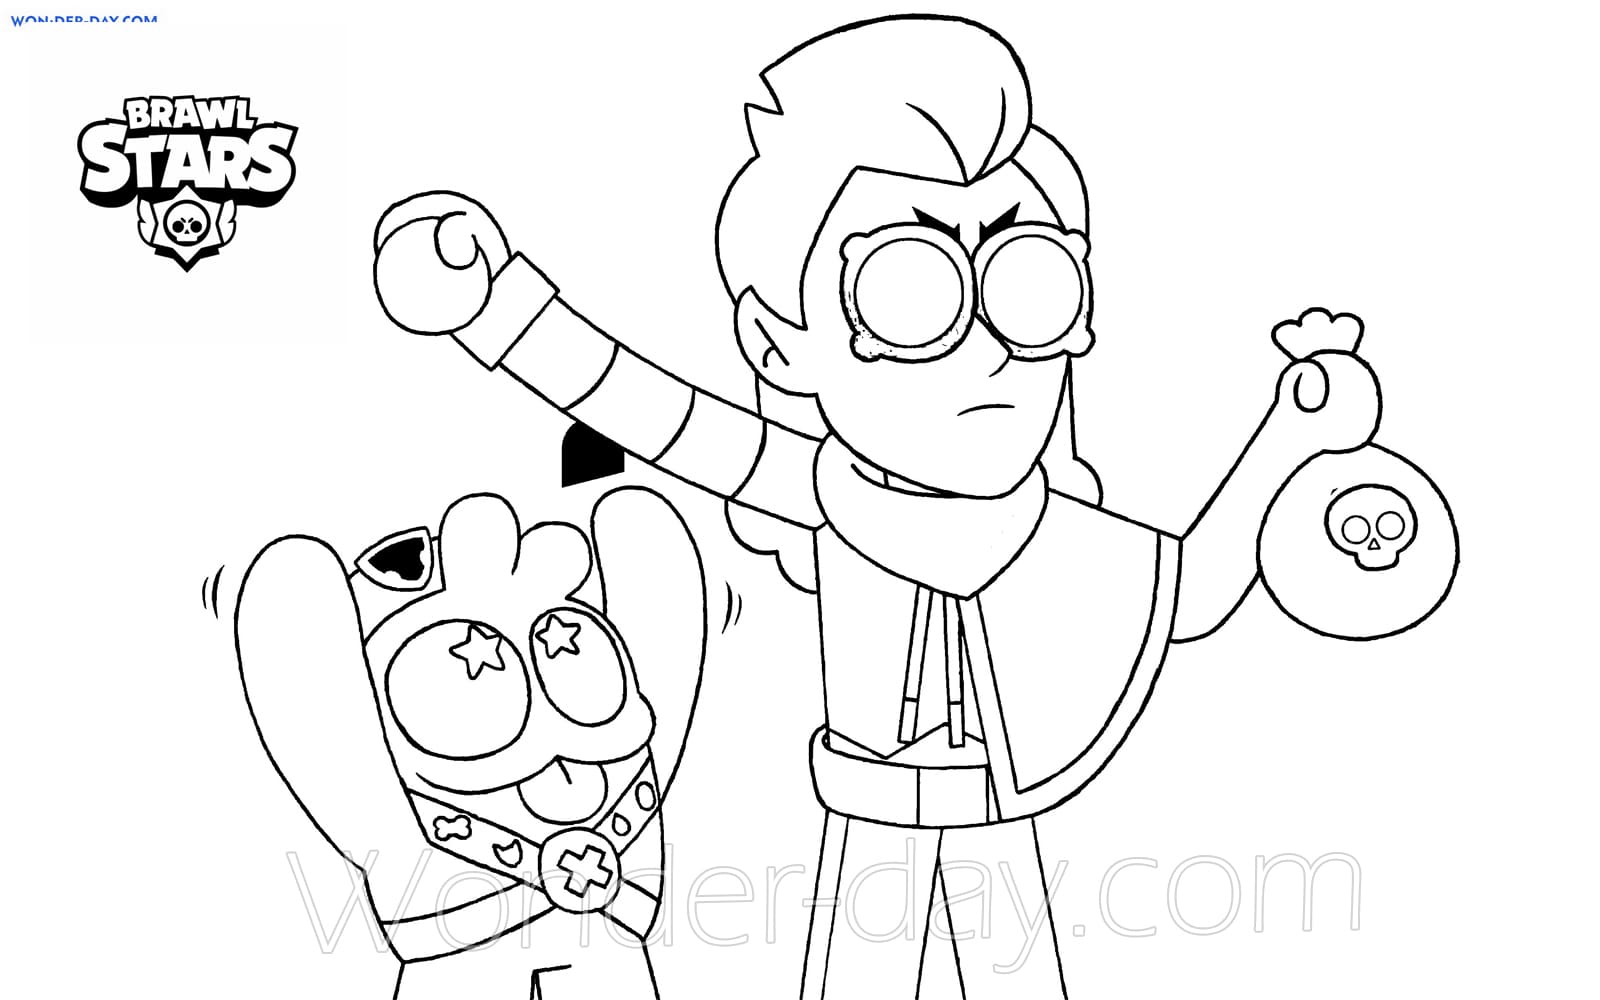 Squeak Brawl Stars Coloring Pages | WONDER DAY — Coloring pages for